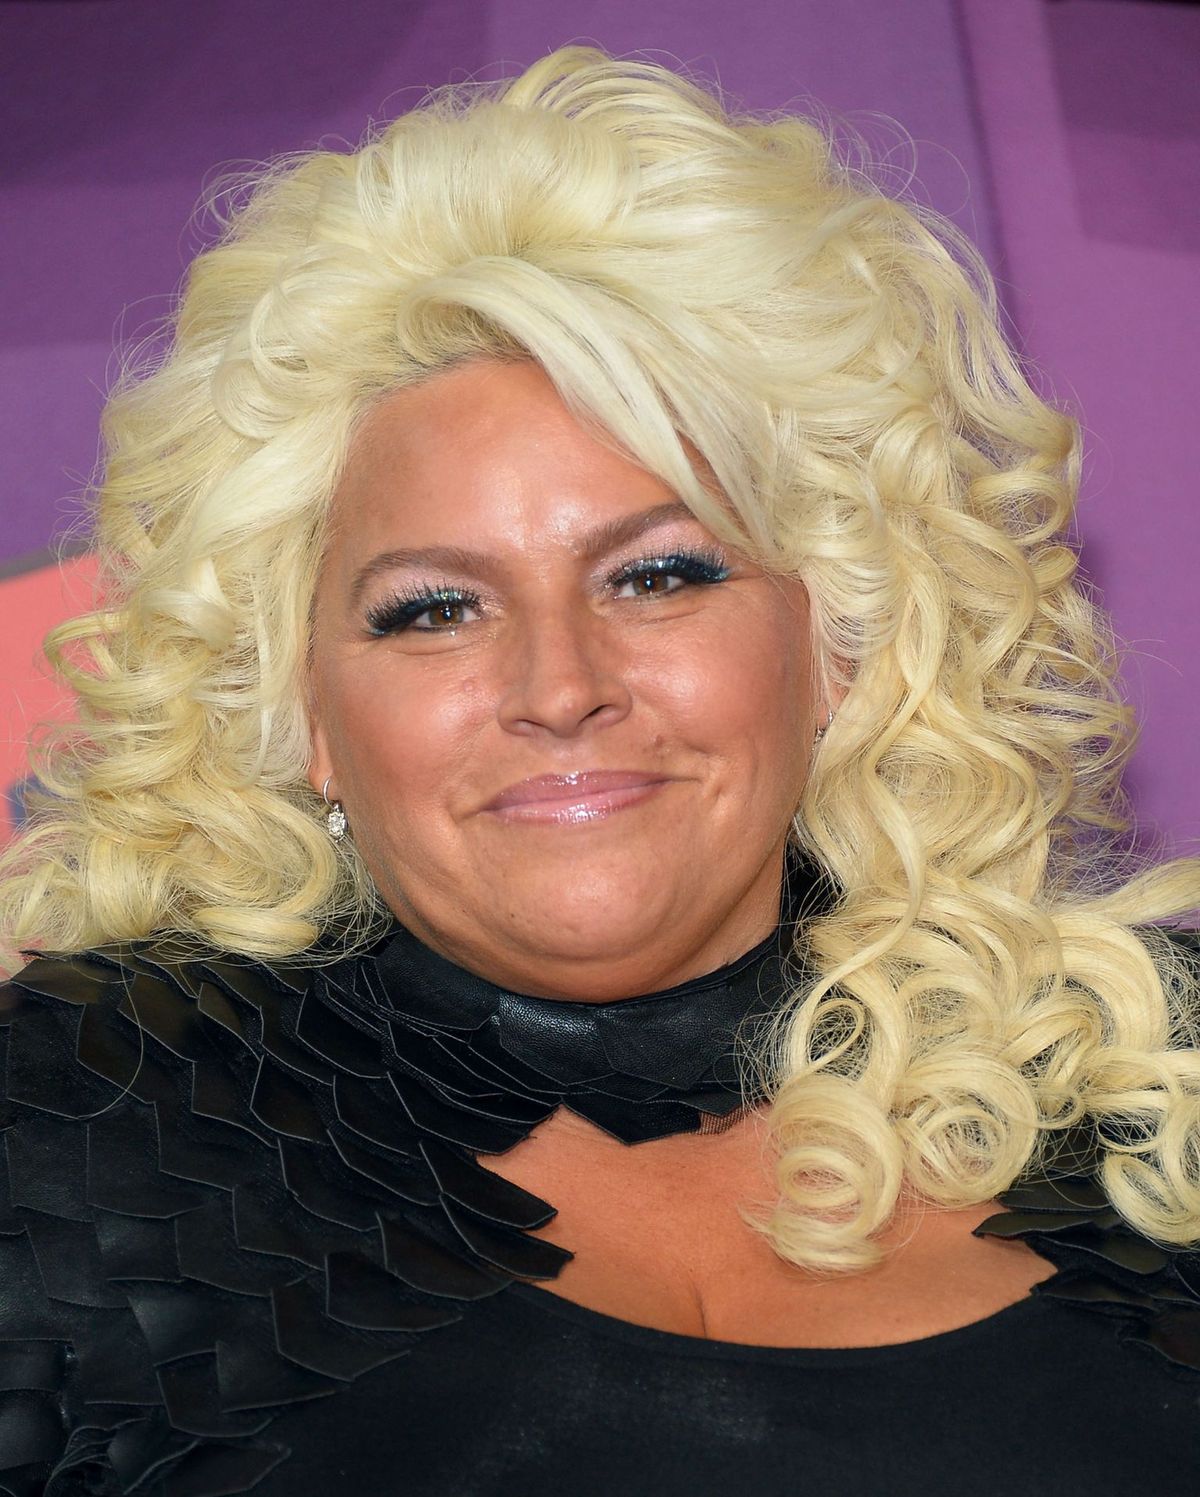 Beth Chapman at the CMT Music Awards at the Bridgestone Arena on June 4, 2014, in Nashville, Tennessee | Photo: Getty Images